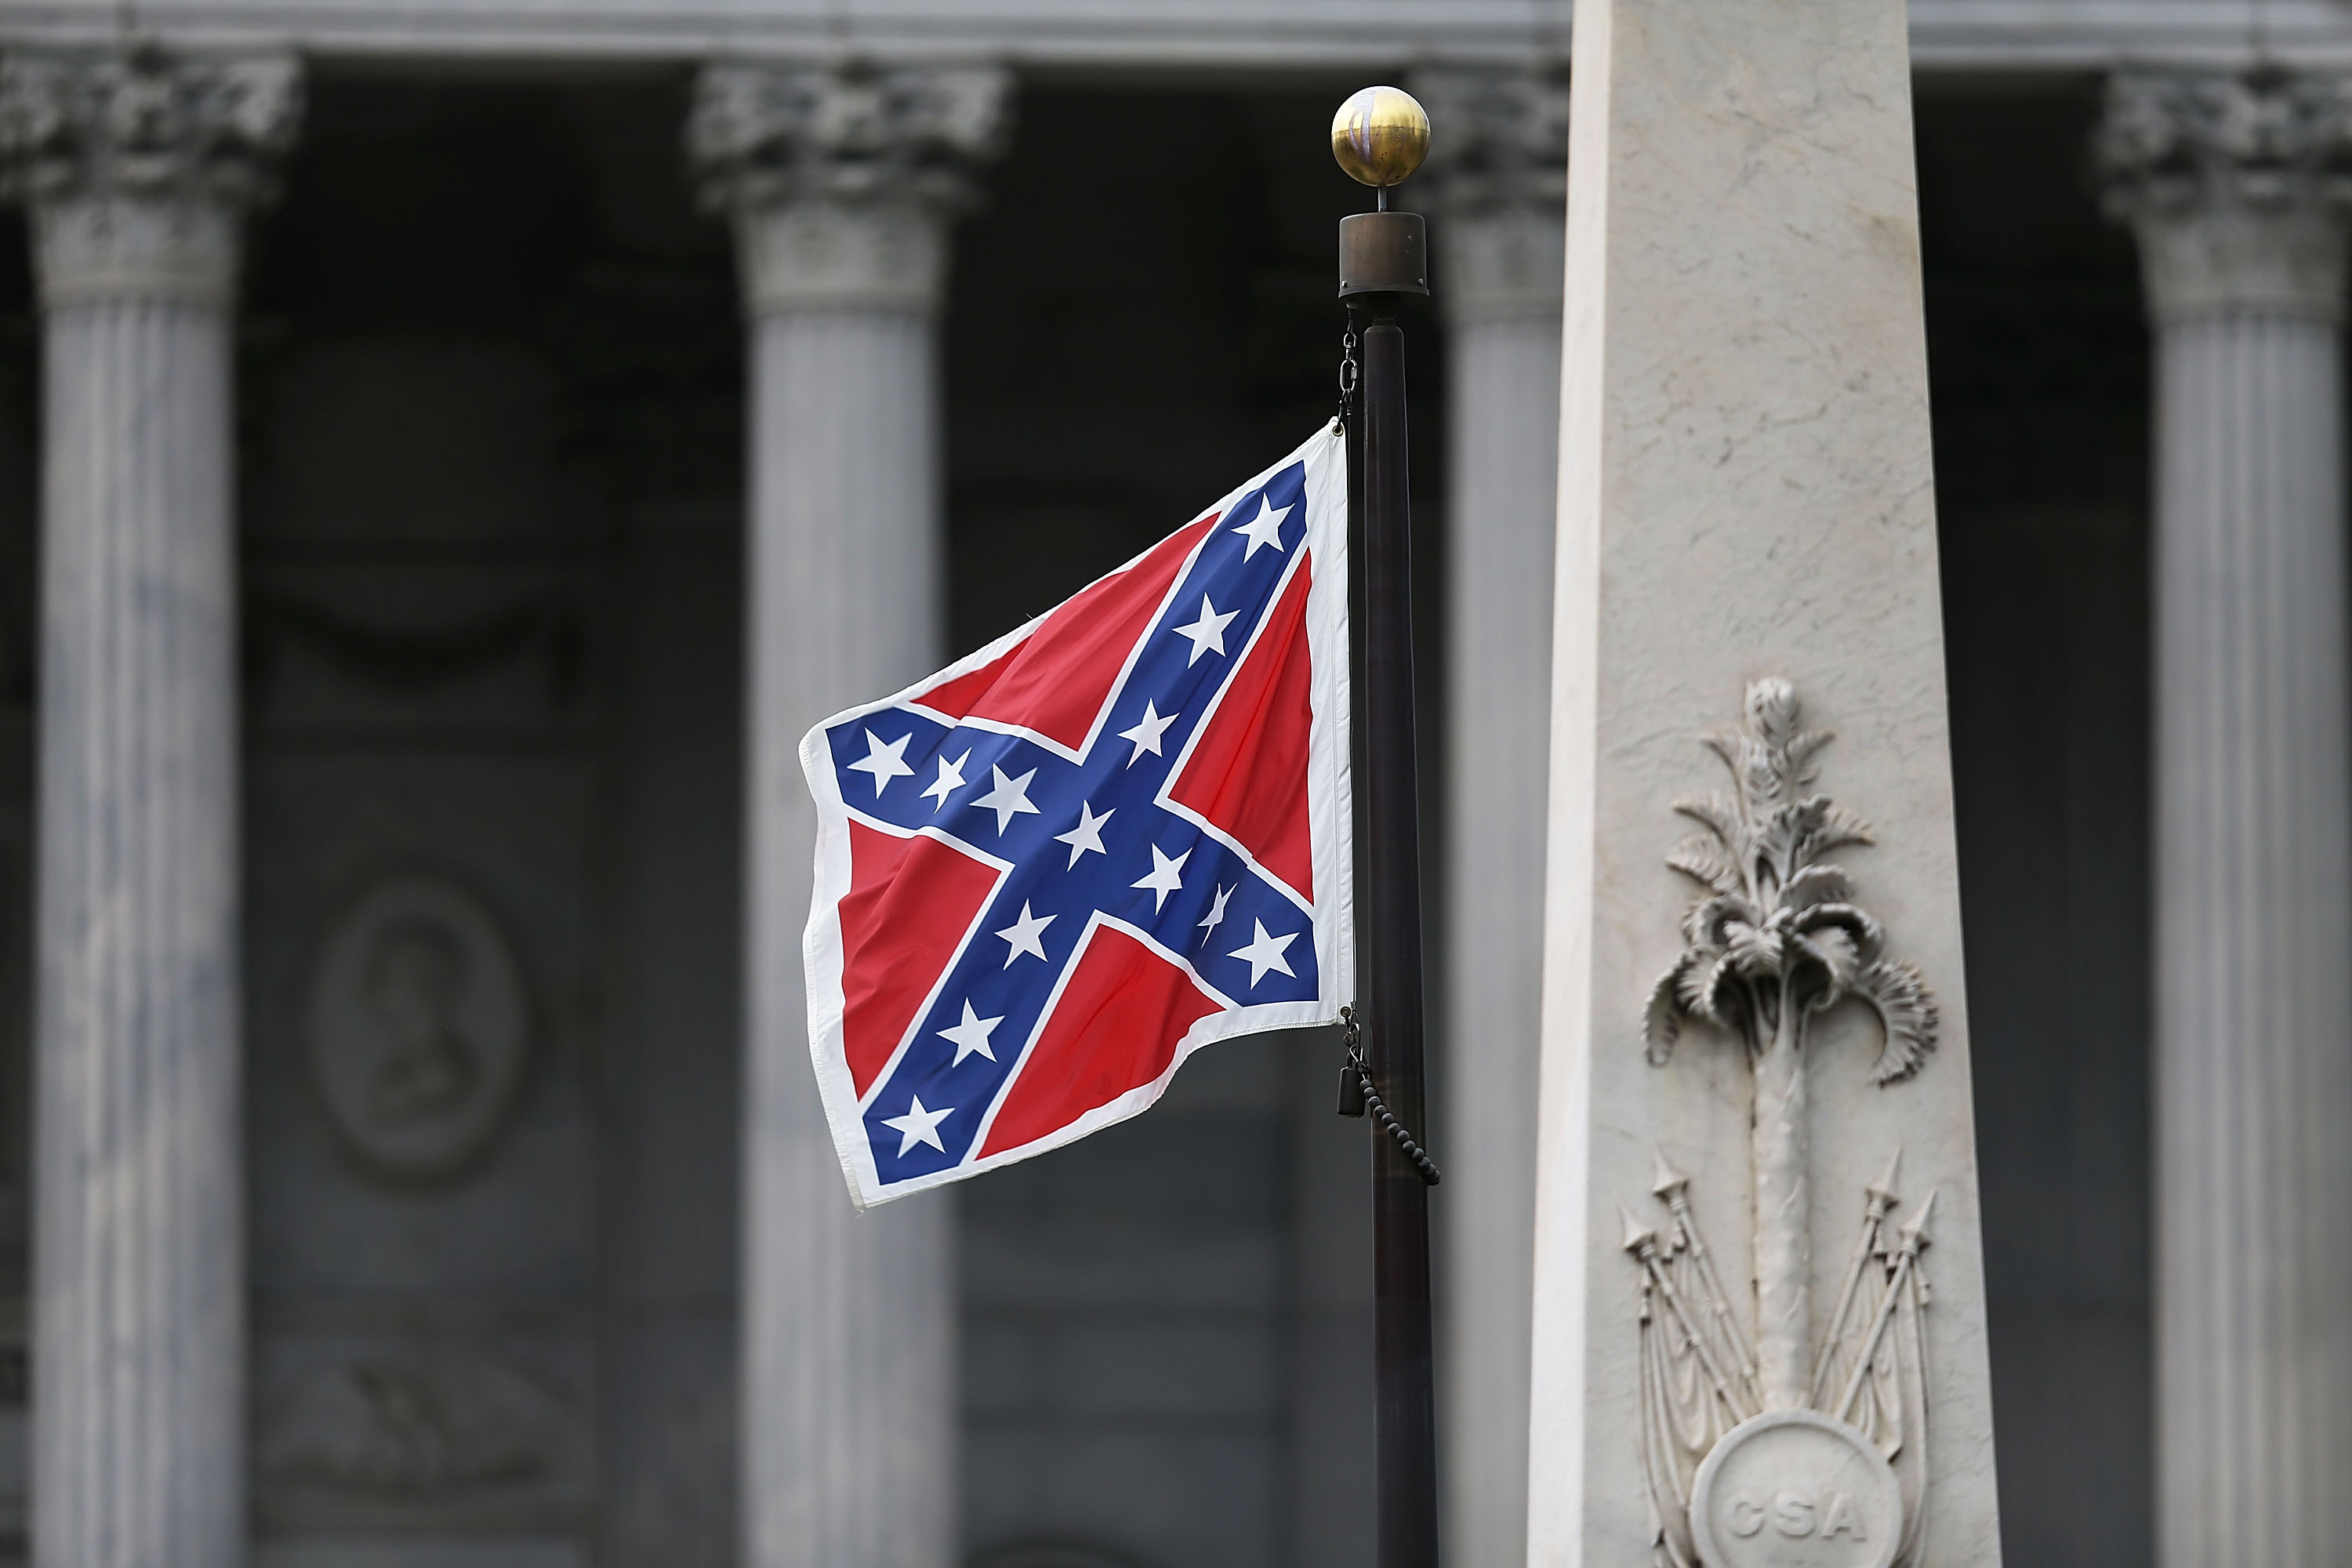 The Confederate flag flies on the Capitol grounds after South Carolina Gov. Nikki Haley announced that she will call for the Confederate flag to be removed in Columbia, S.C., on June 22, 2015. (Joe Raedle—Getty Images)